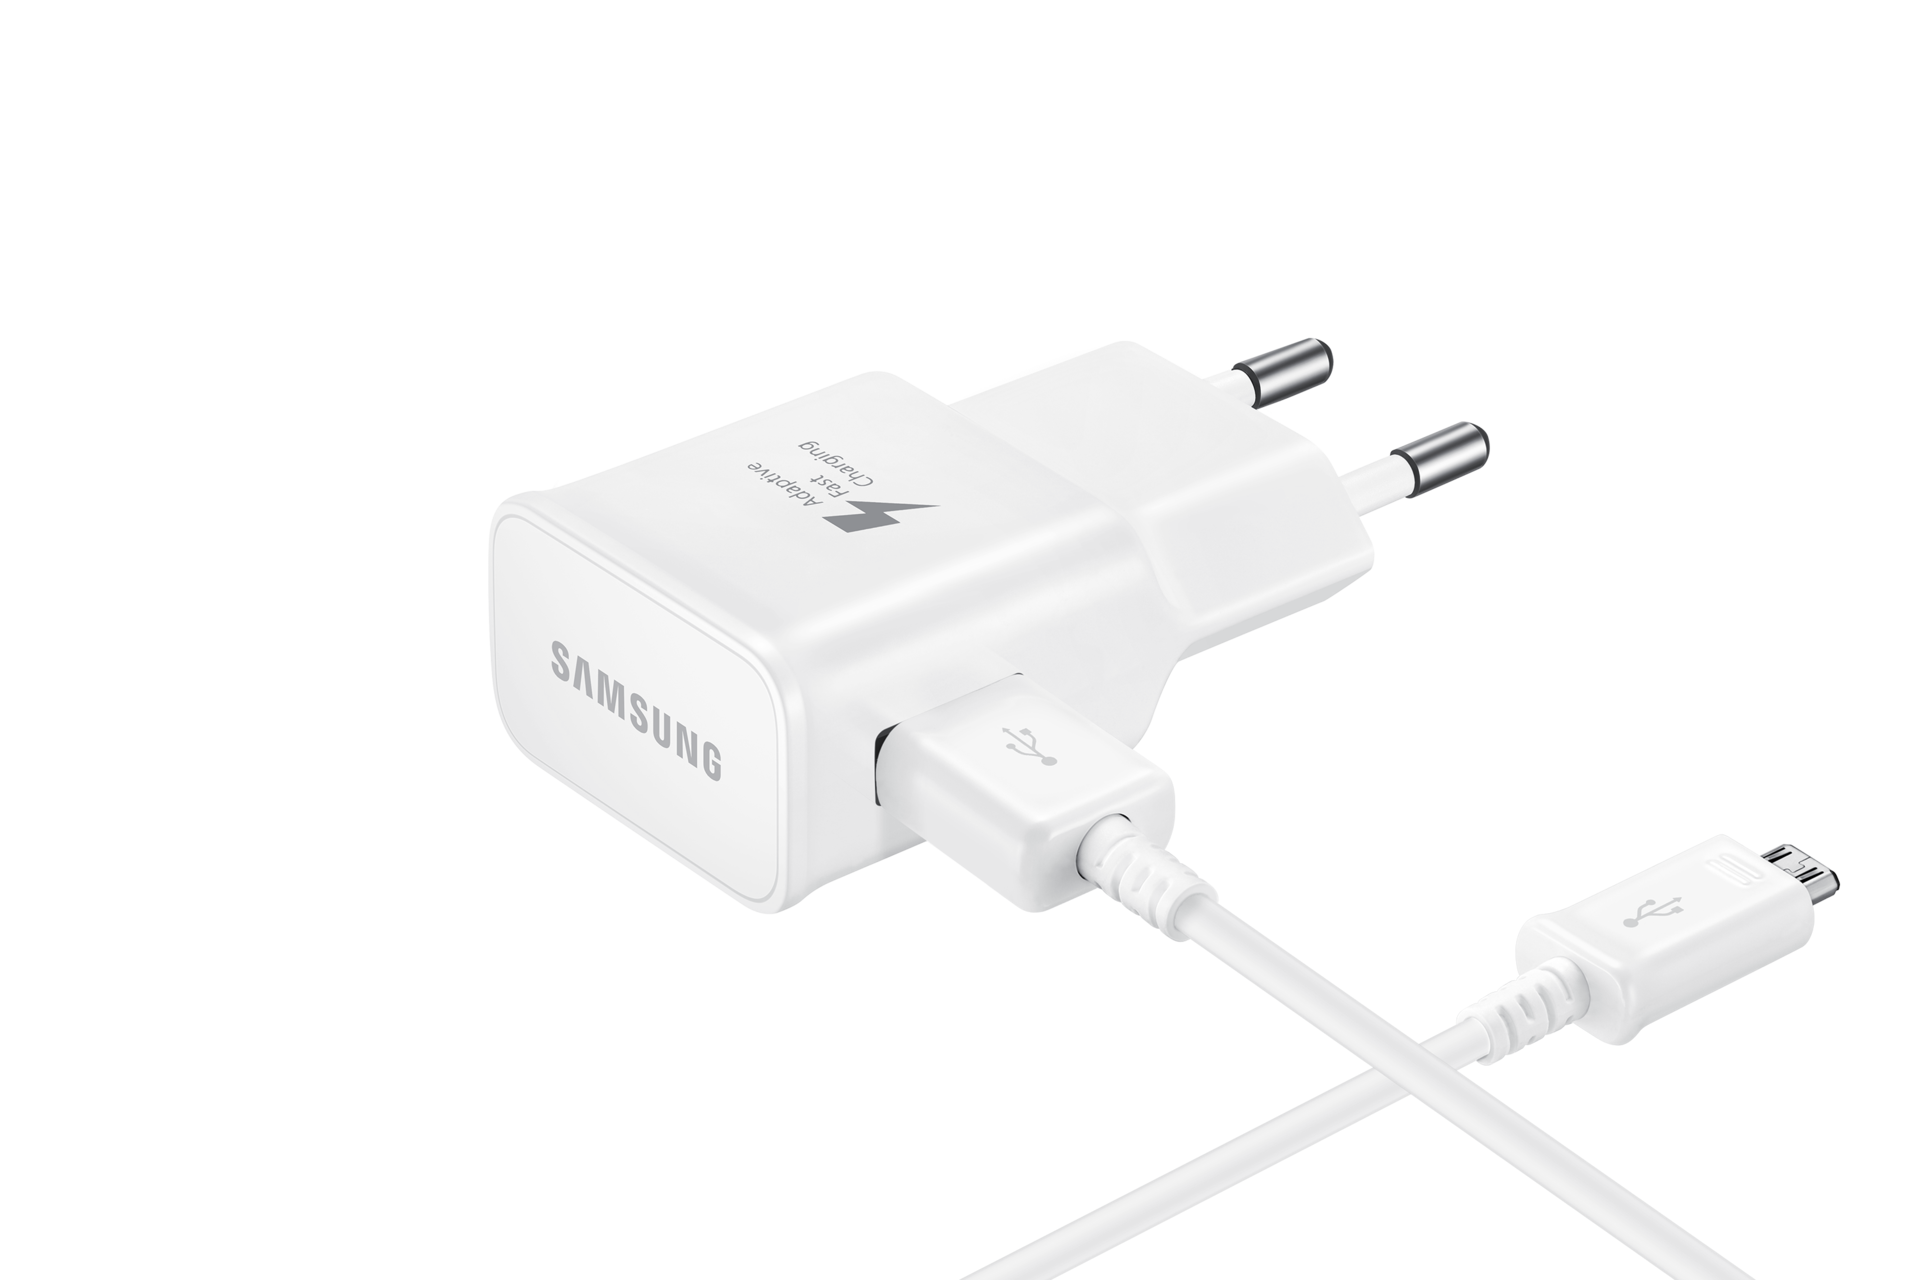 https://images.samsung.com/is/image/samsung/fr-travel-adapter-micro-usb-ta20-ep-ta20eweugww-whiteflower-L-Perspective-97430031?$624_624_PNG$